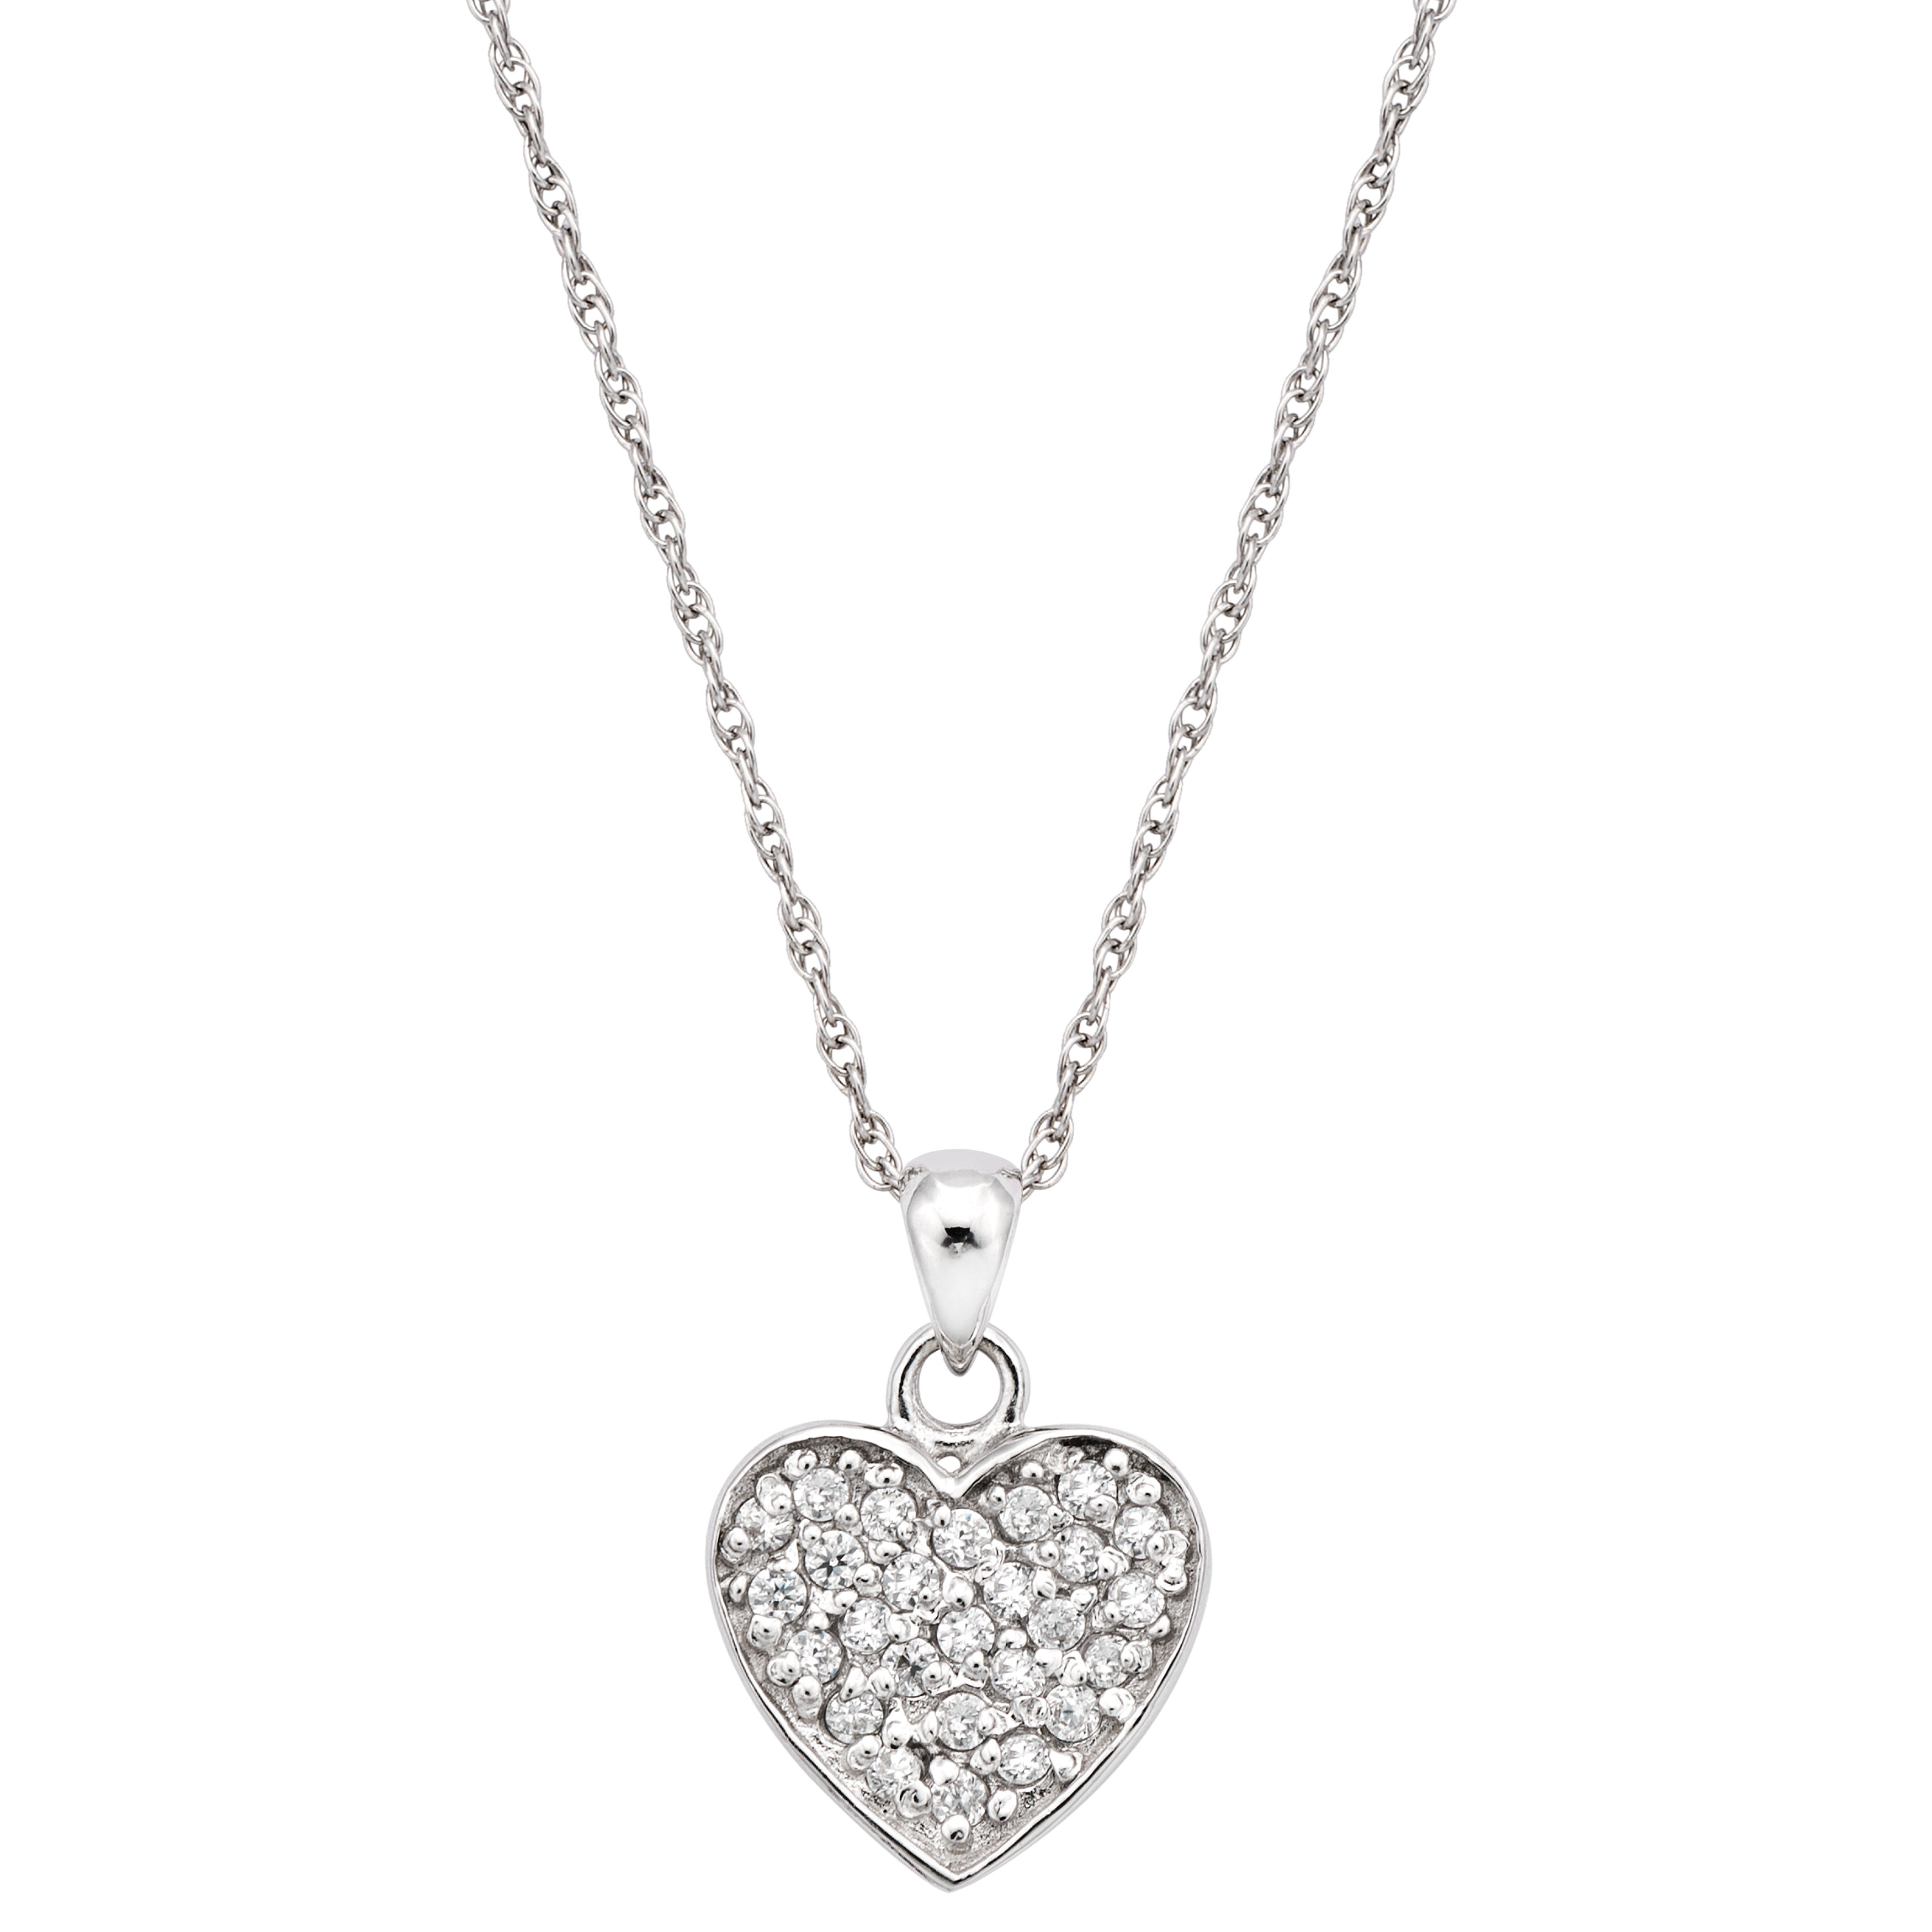 Details about  / Sterling Silver Cubic Zirconia Graduated Heart Pendant